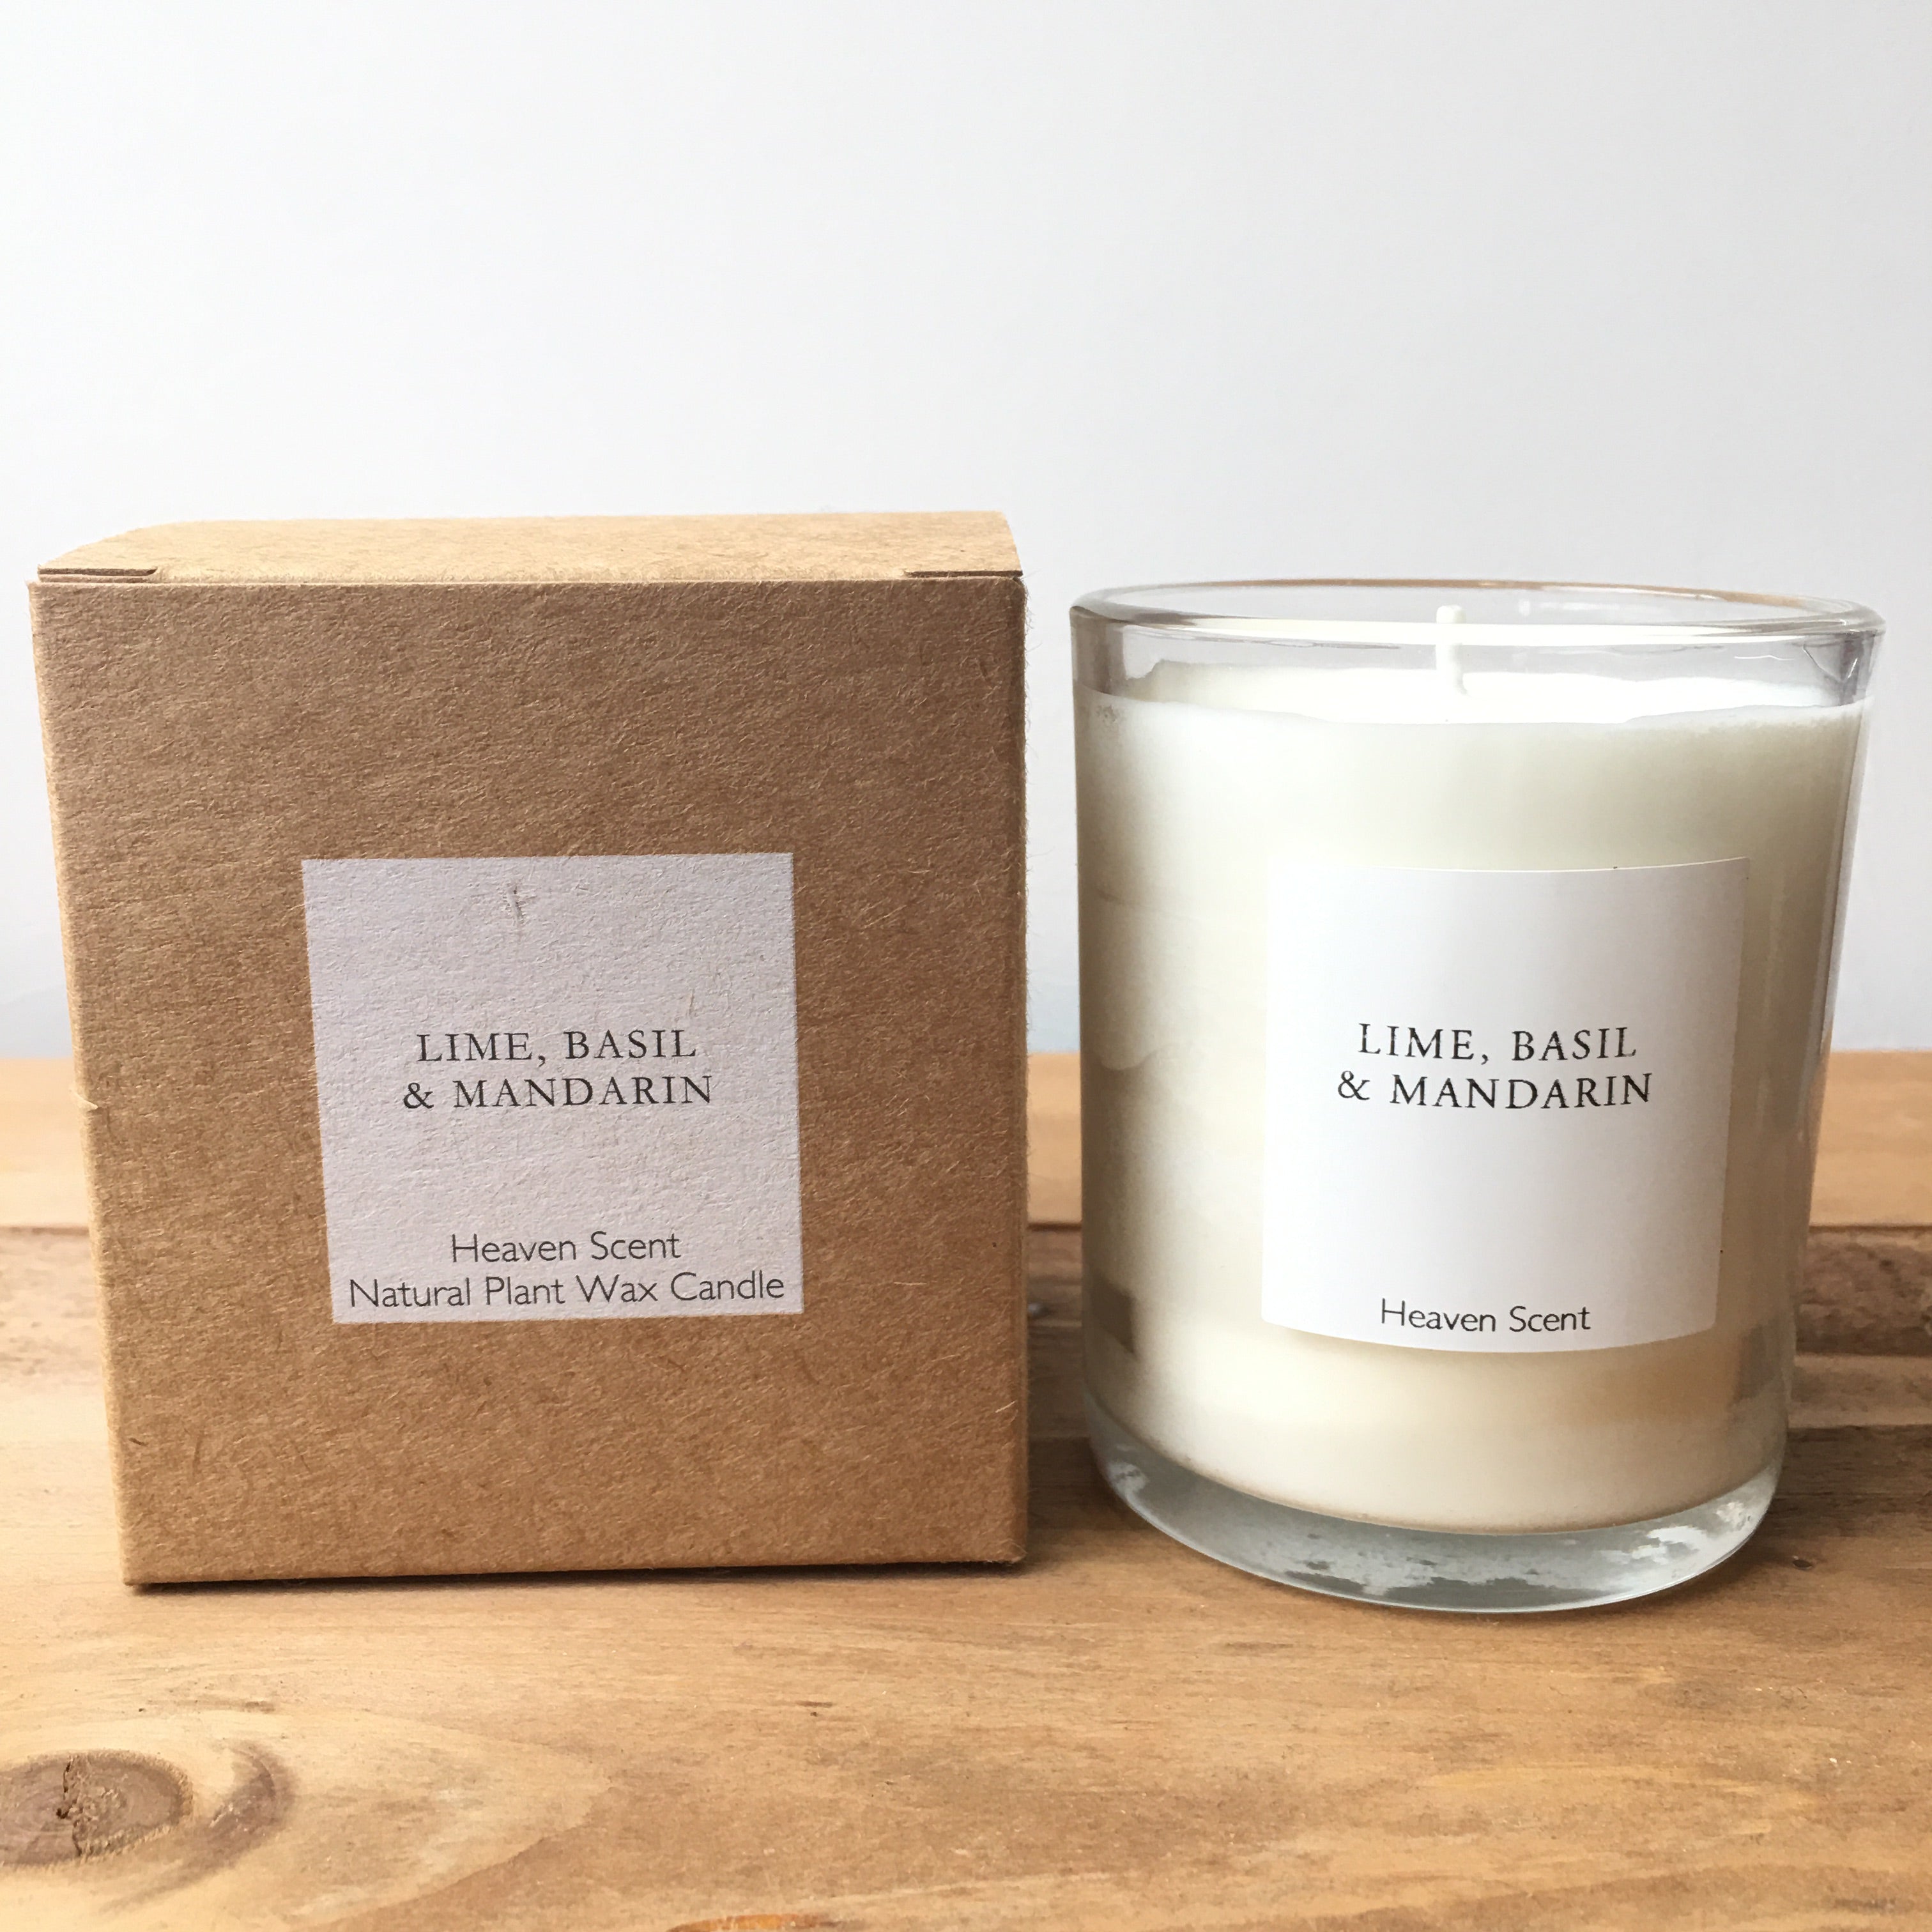 SCENTED CANDLE Lime, Basil & Mandarin 20 CL HEAVEN SCENT